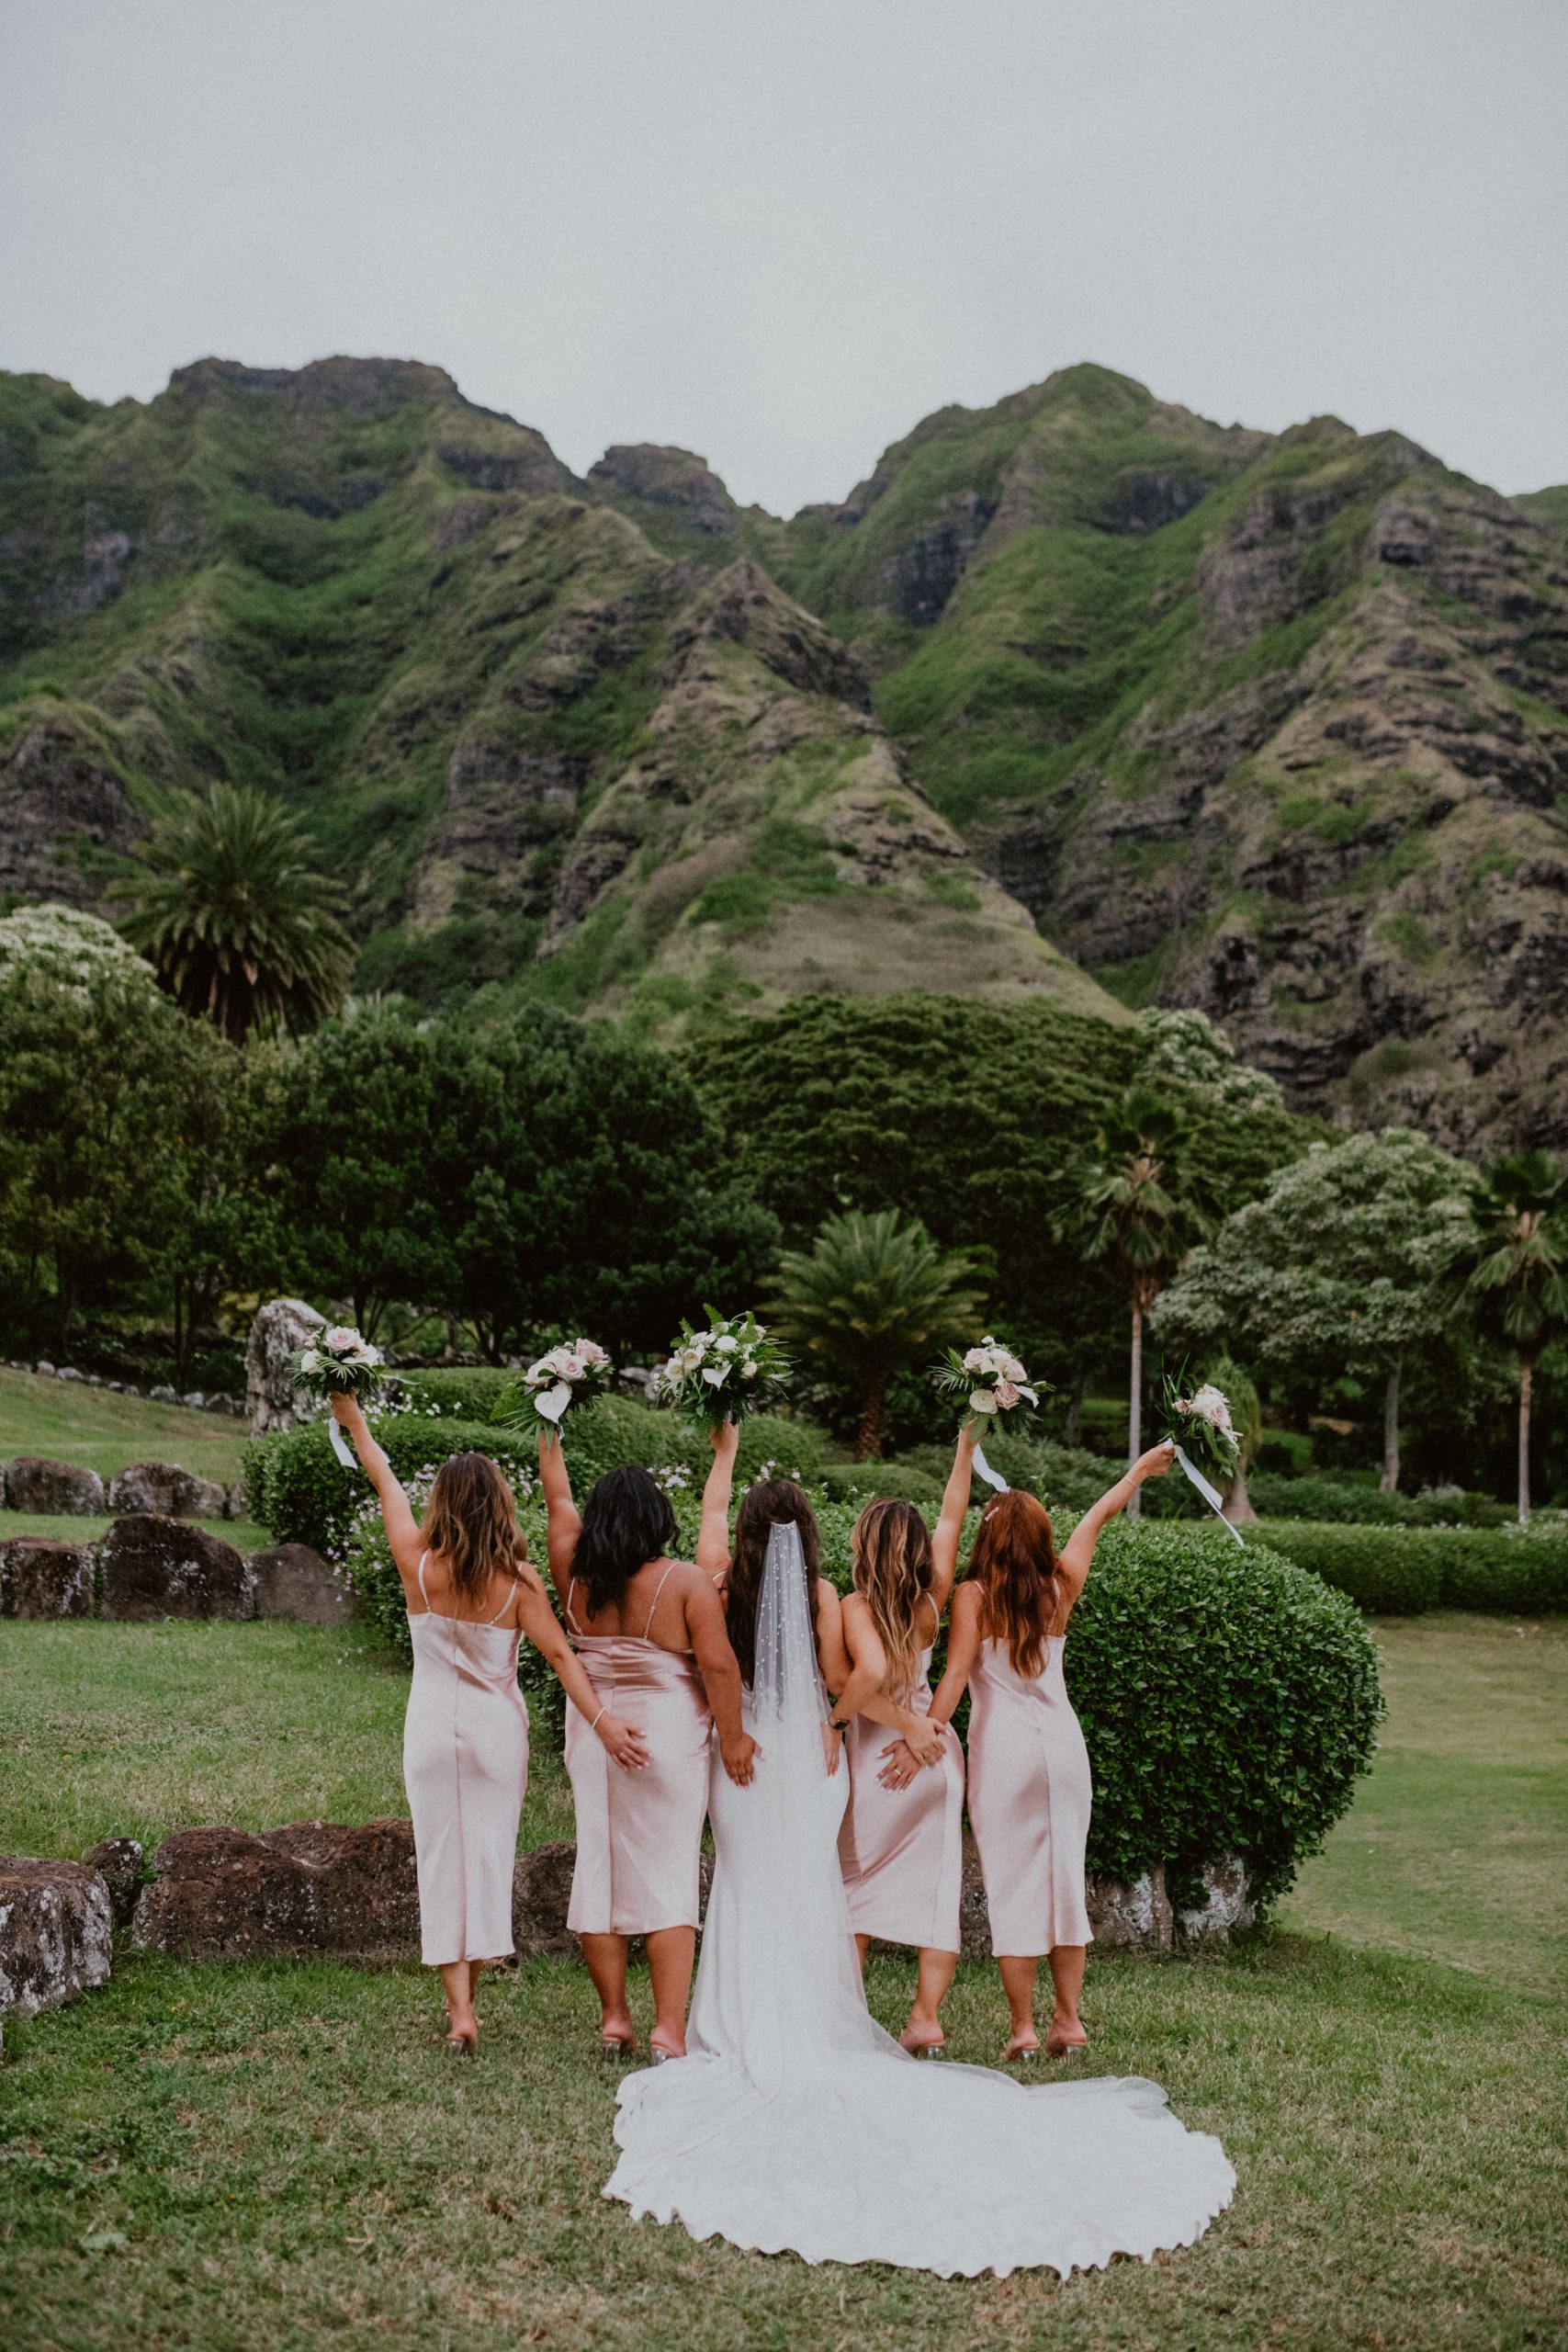 Bride and Bridesmaids hold up their wedding bouquets at the Kualoa Ranch Wedding in front of the Oahu Mountains on the Islands | Oahu Wedding Photographer, Oahu Elopement Photographer, Destination Wedding Photographer, Destination Elopement Photographer, Newlywed moments ideas, Newlywed Photography inspiration, Hawaii Elopement ideas | chelseaabril.com